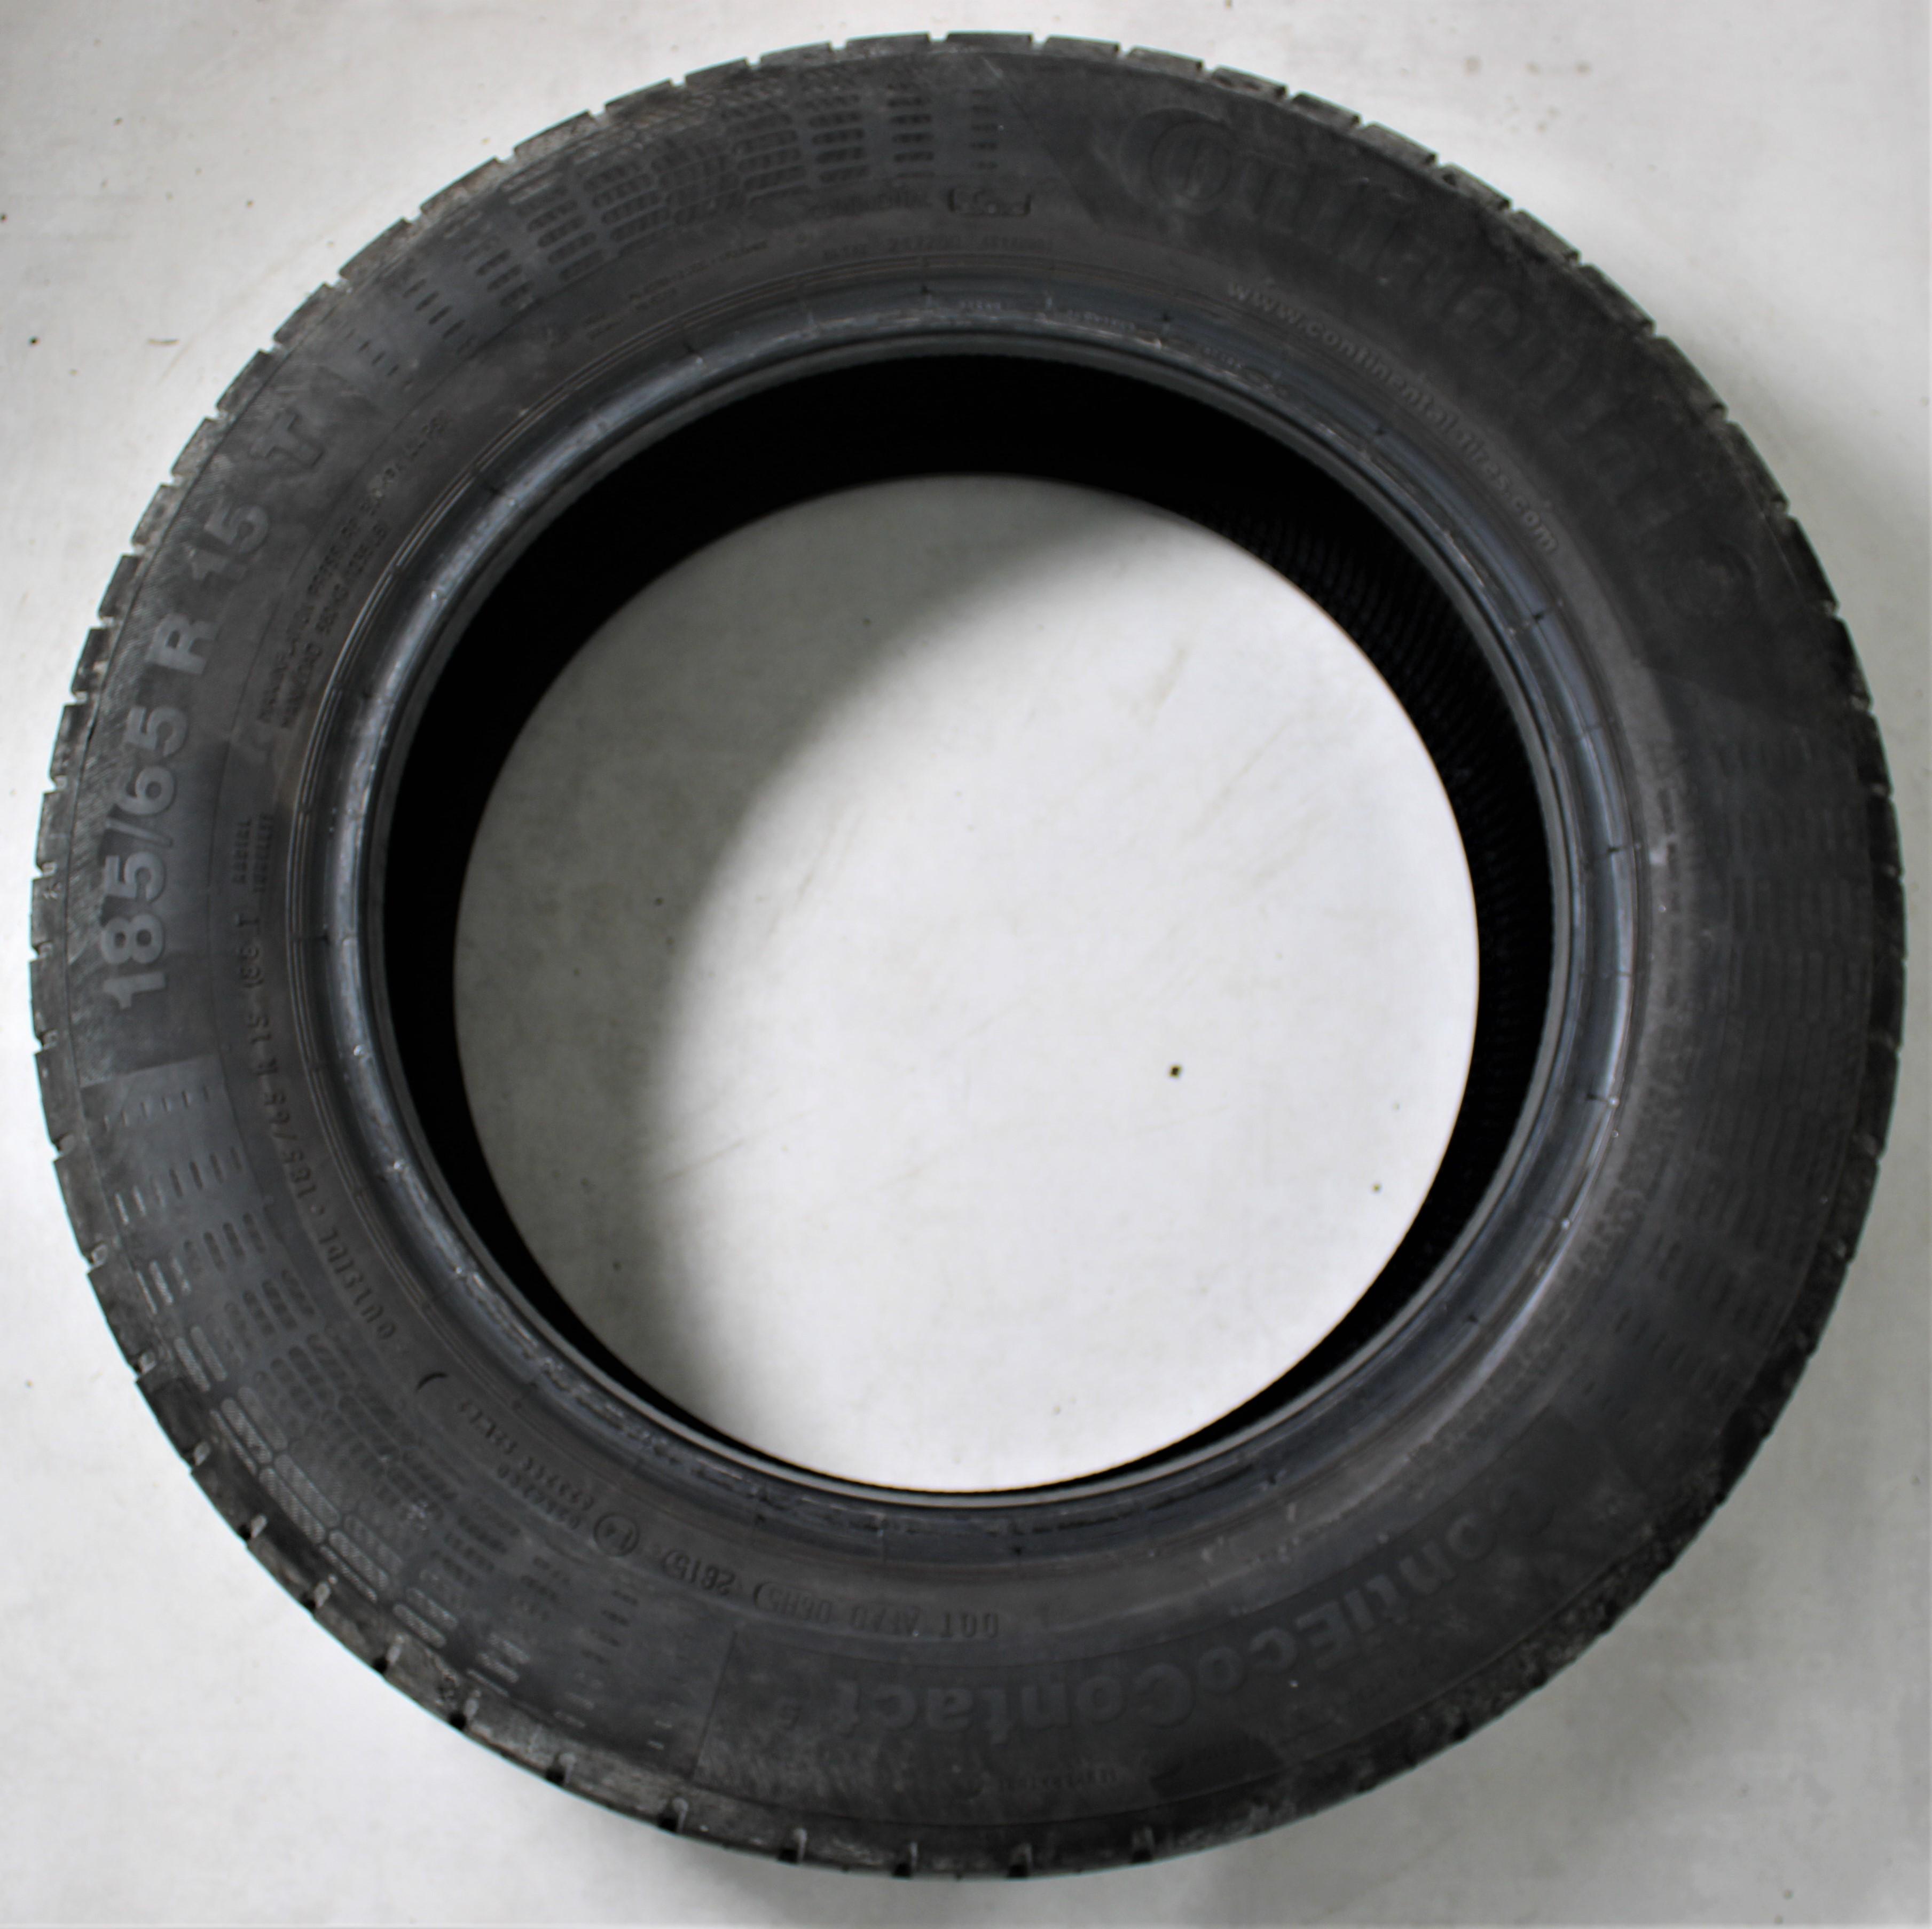 1 x 185/65R15 88T Sommerreifen Continental Eco Contact 5 5mm 2015